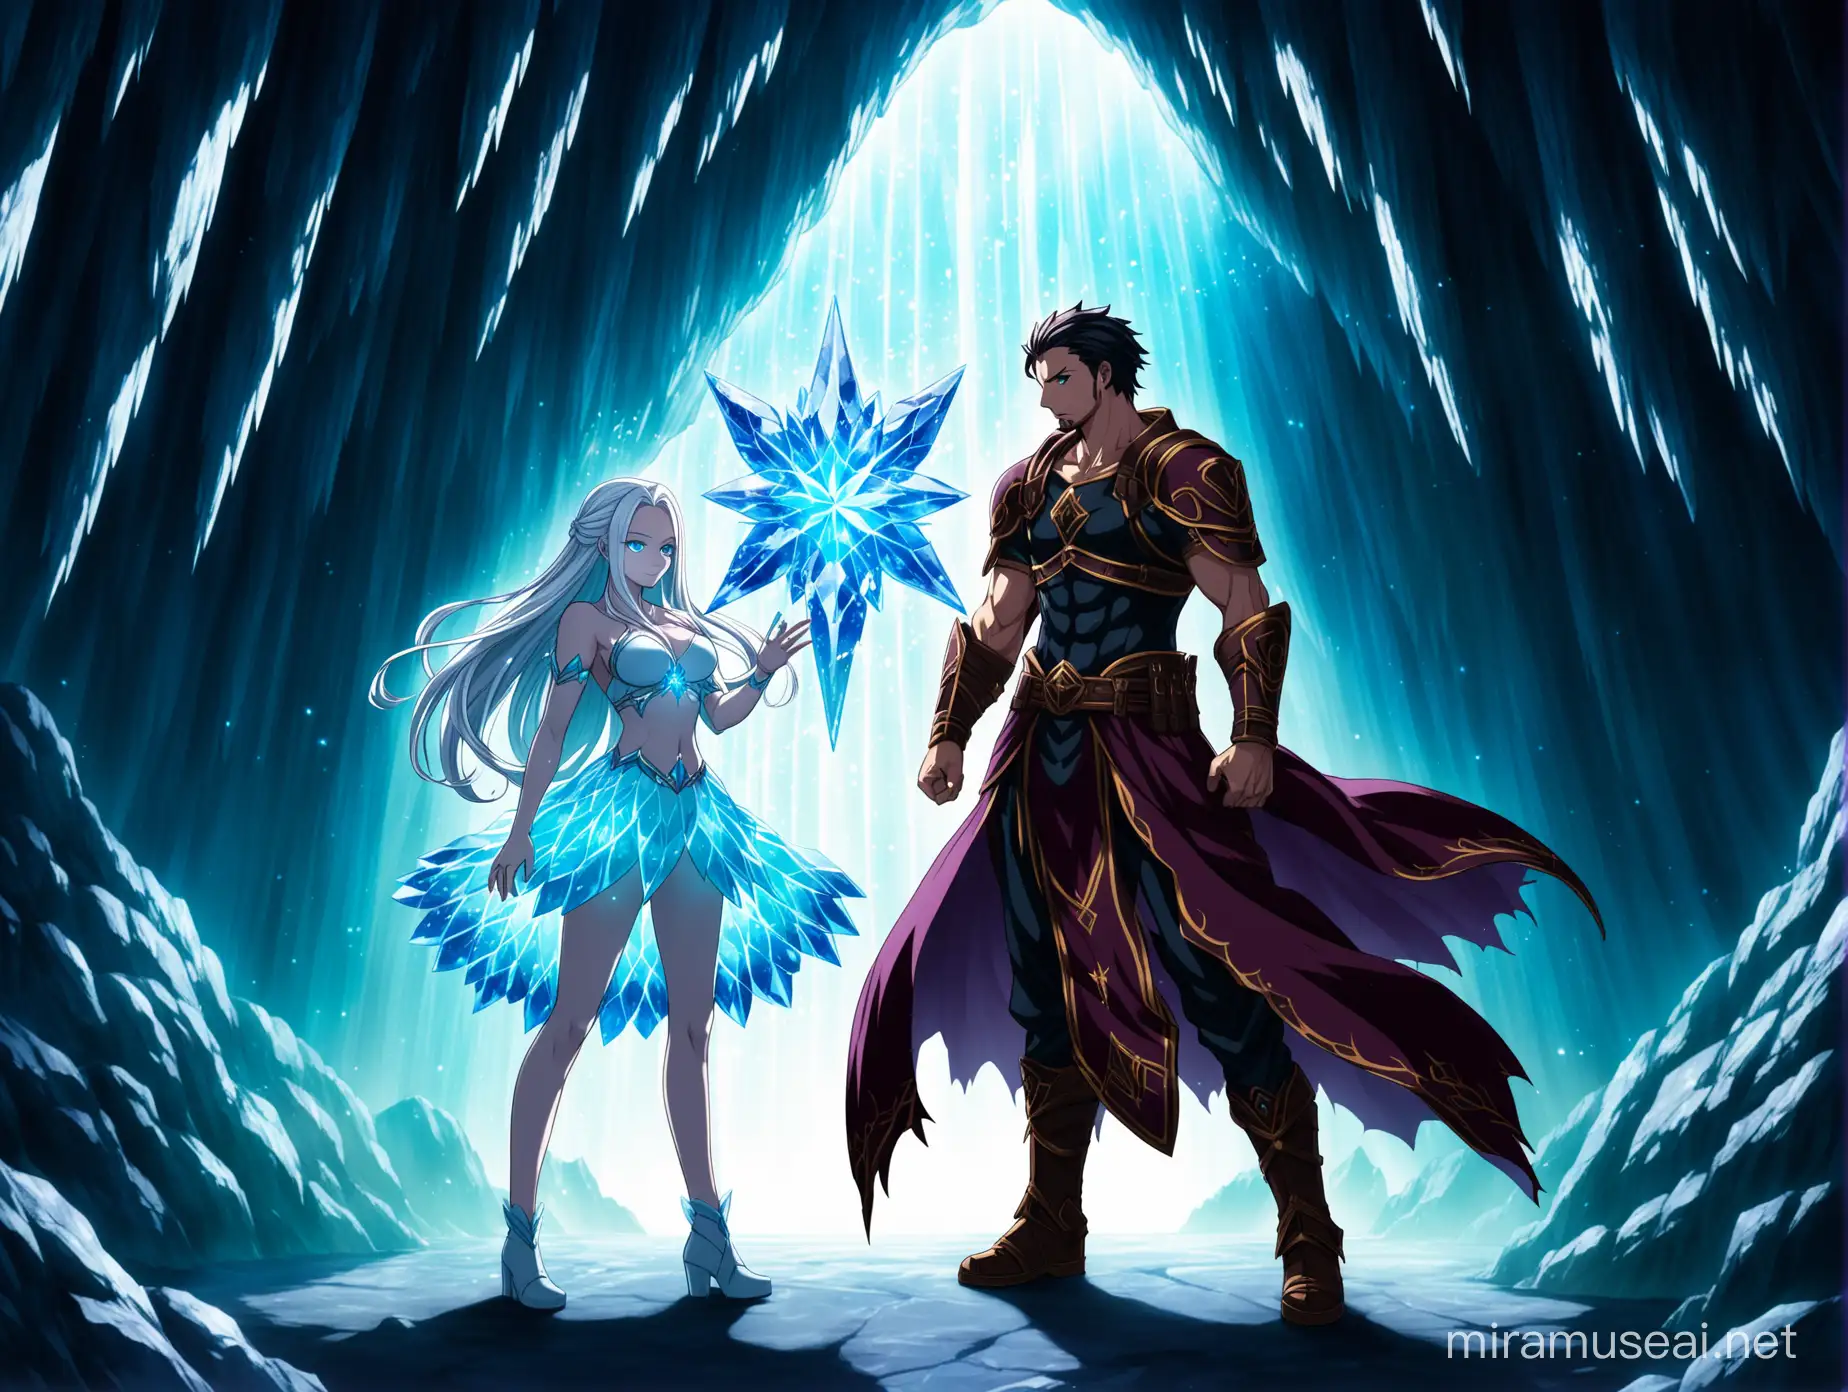 mirajane straus in angelic form and her boyfriend a male latin warrior protect a blue crystal in a luminous cave